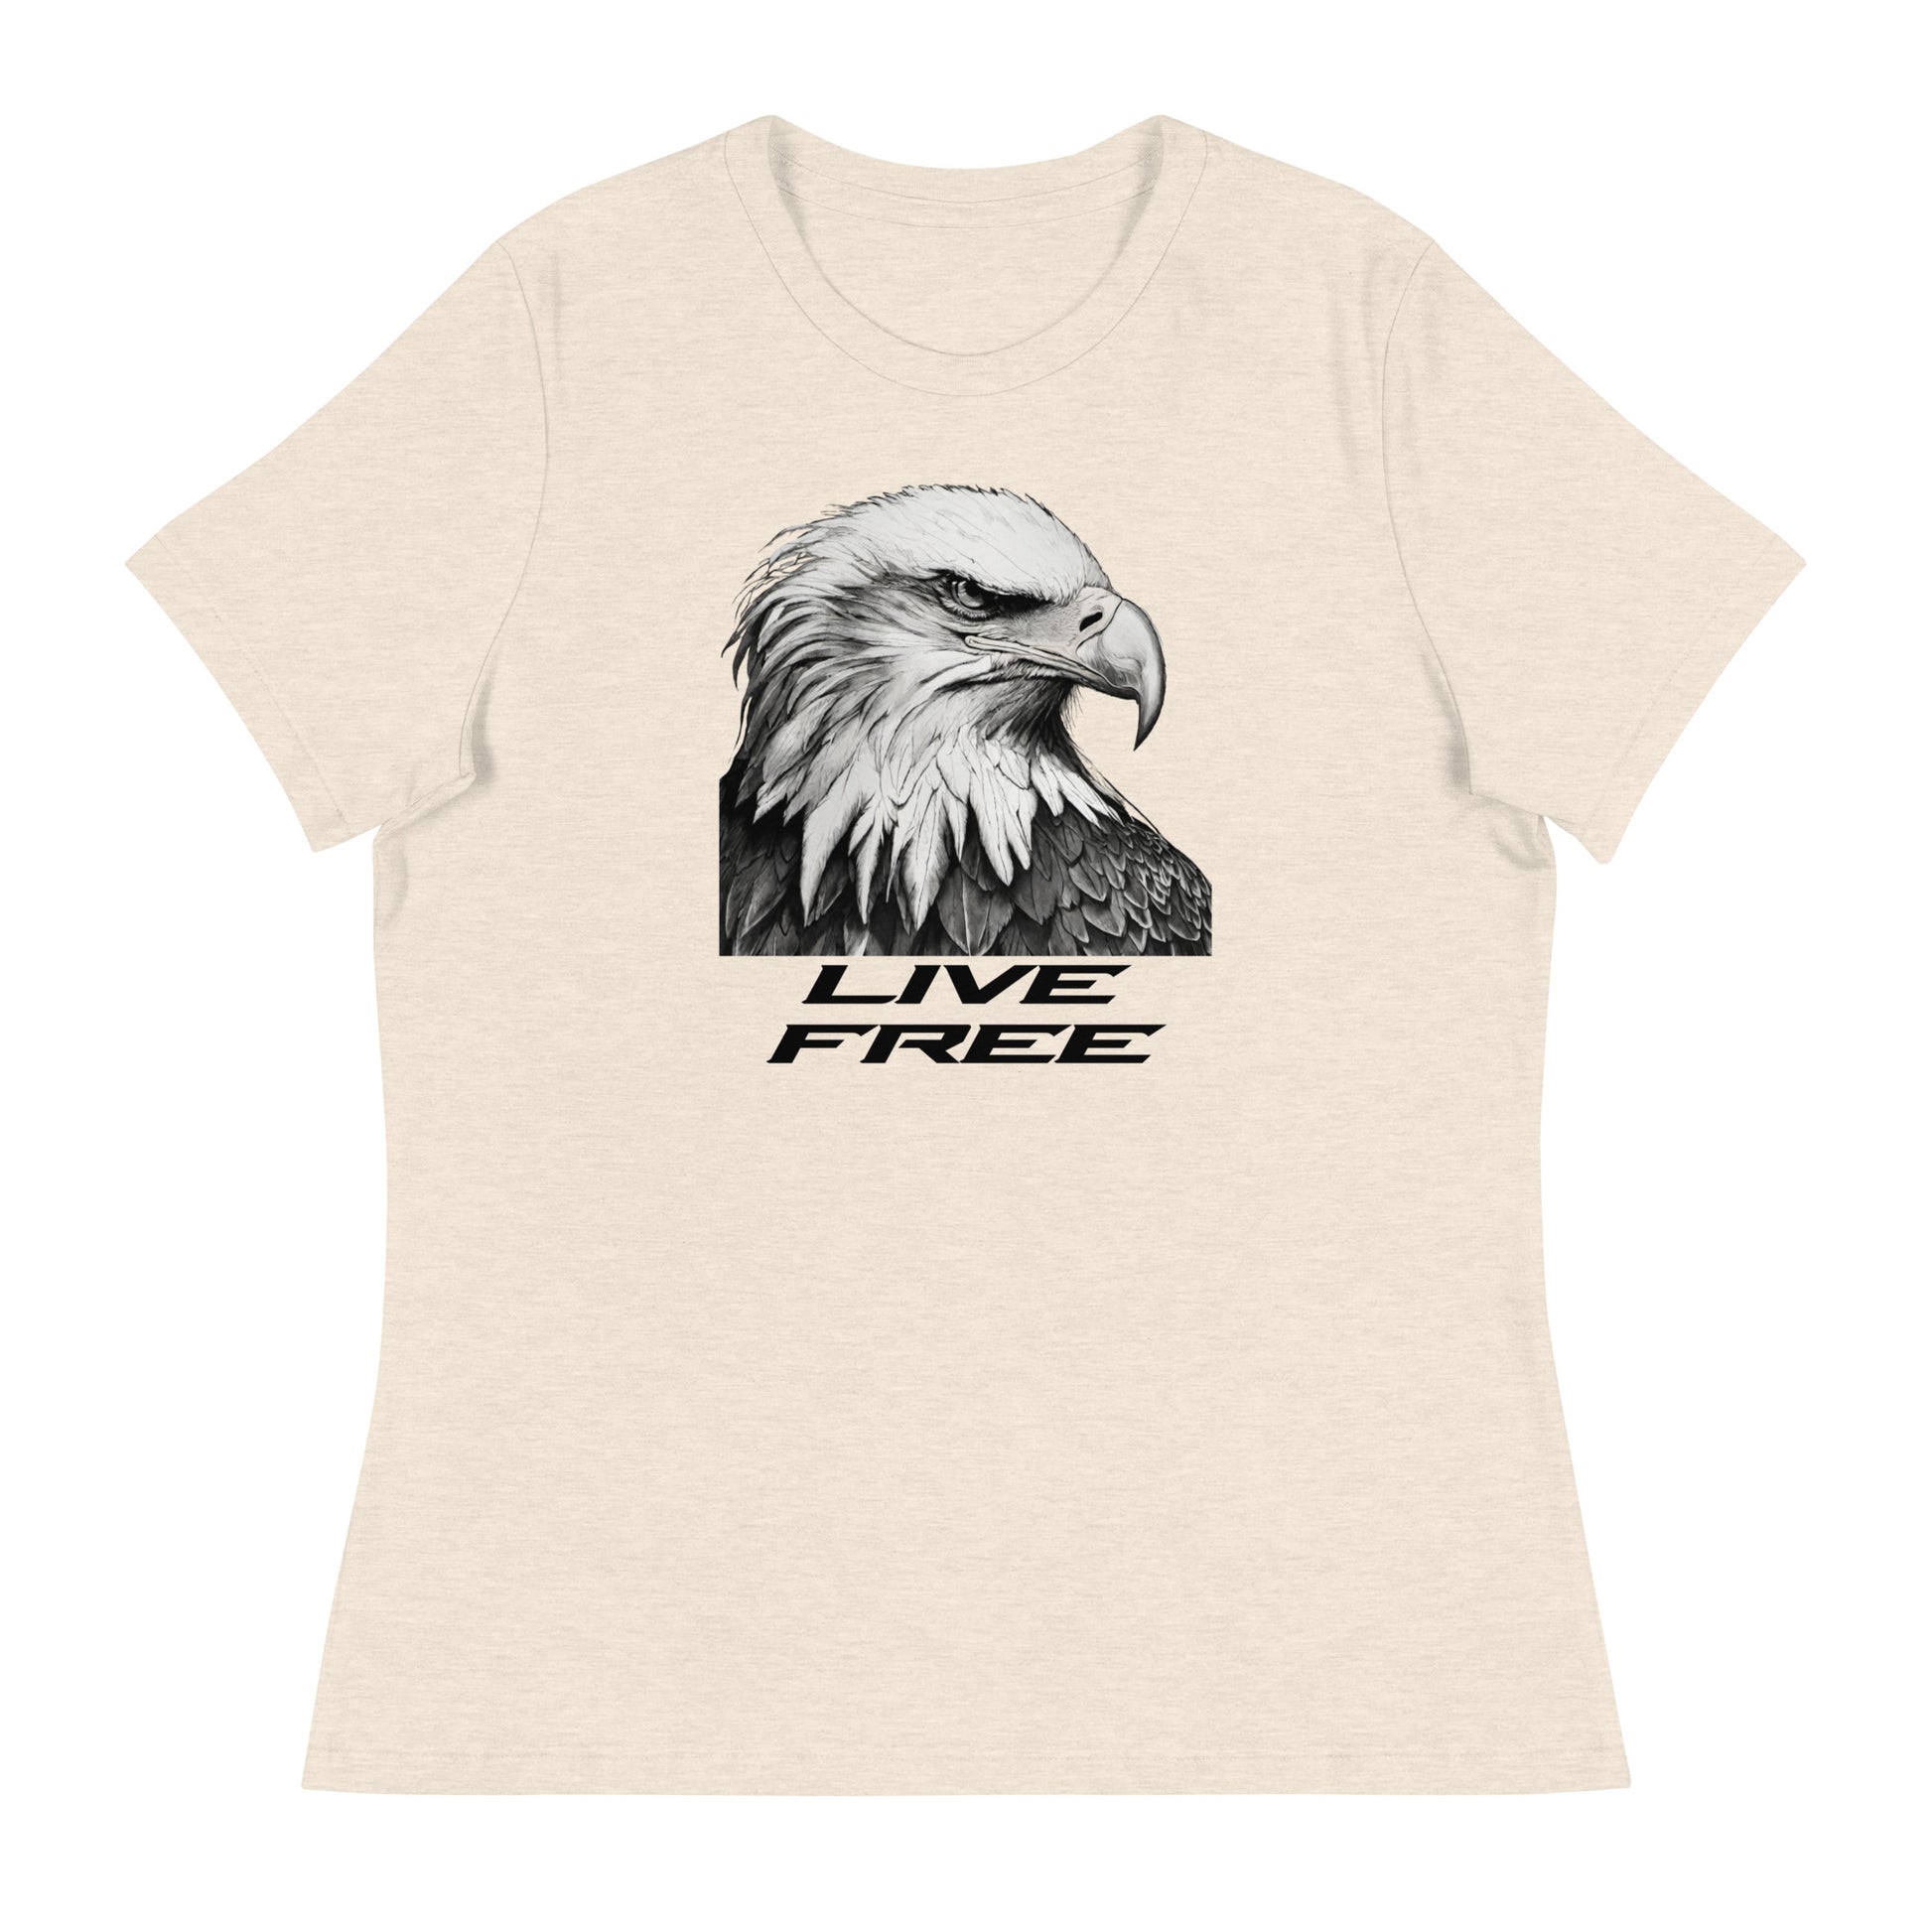 Live Free Women's T-Shirt Heather Prism Natural